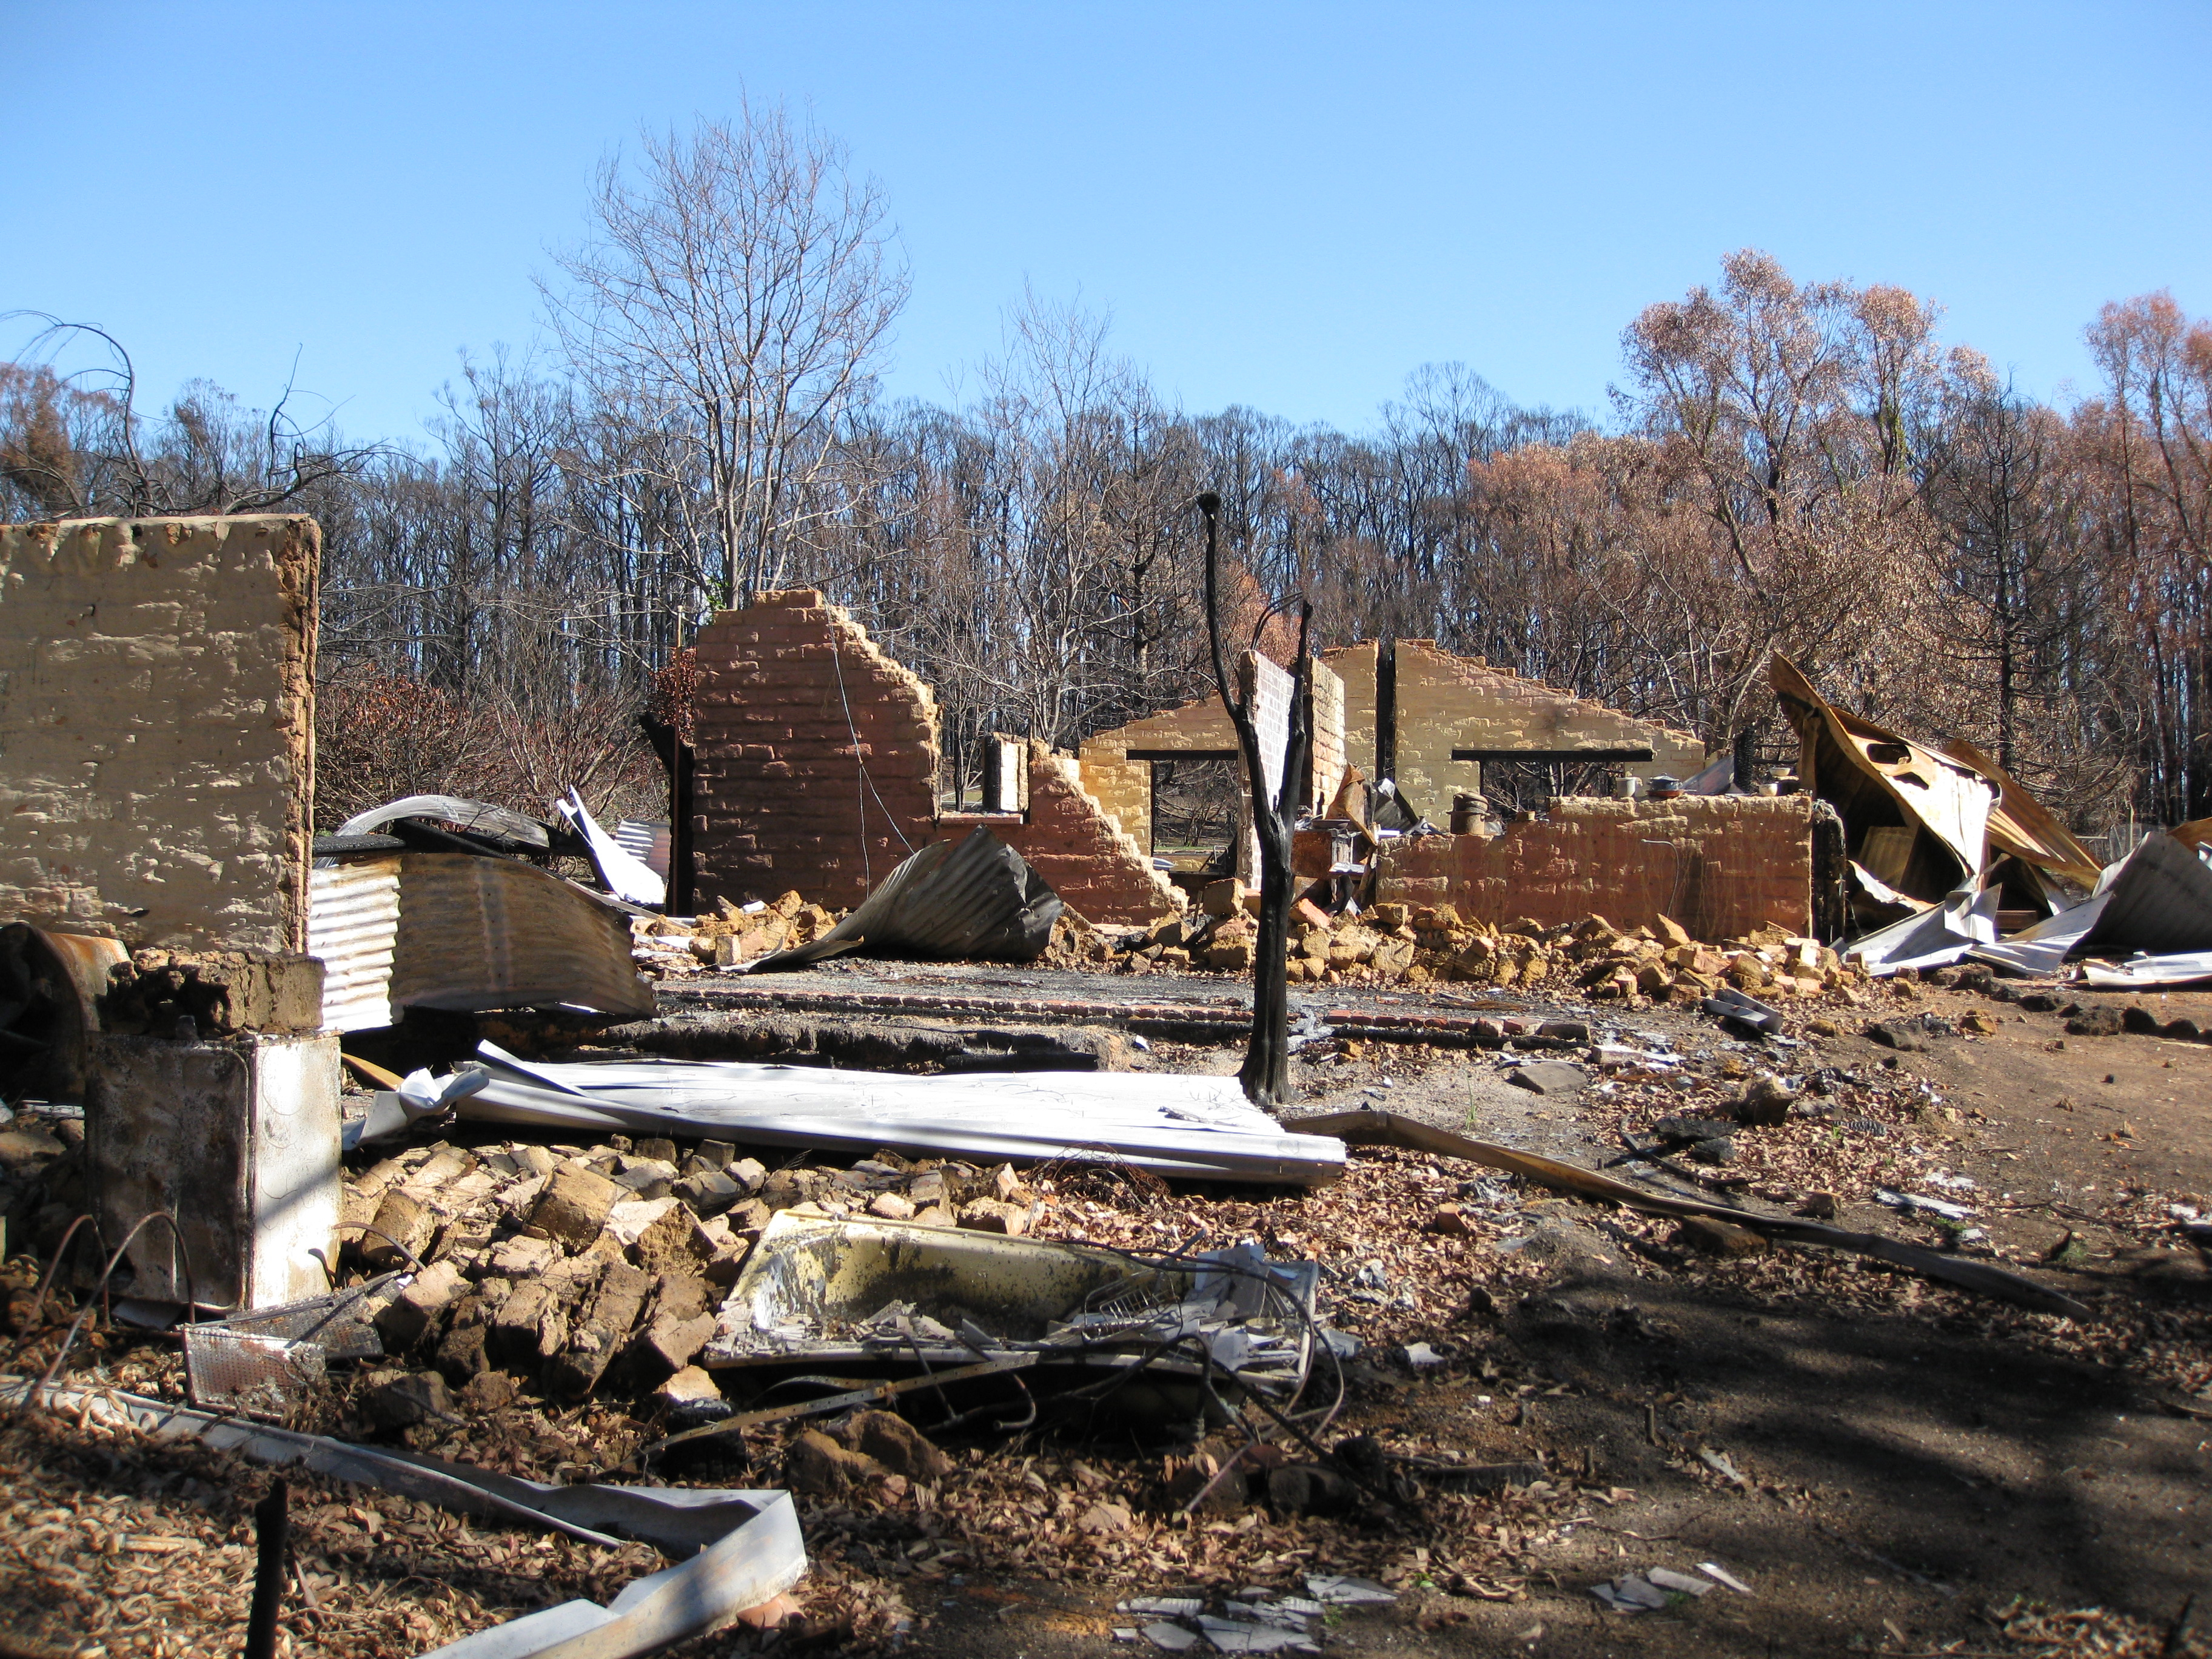 Image shows burnt home in ruins with burnt forest behind.